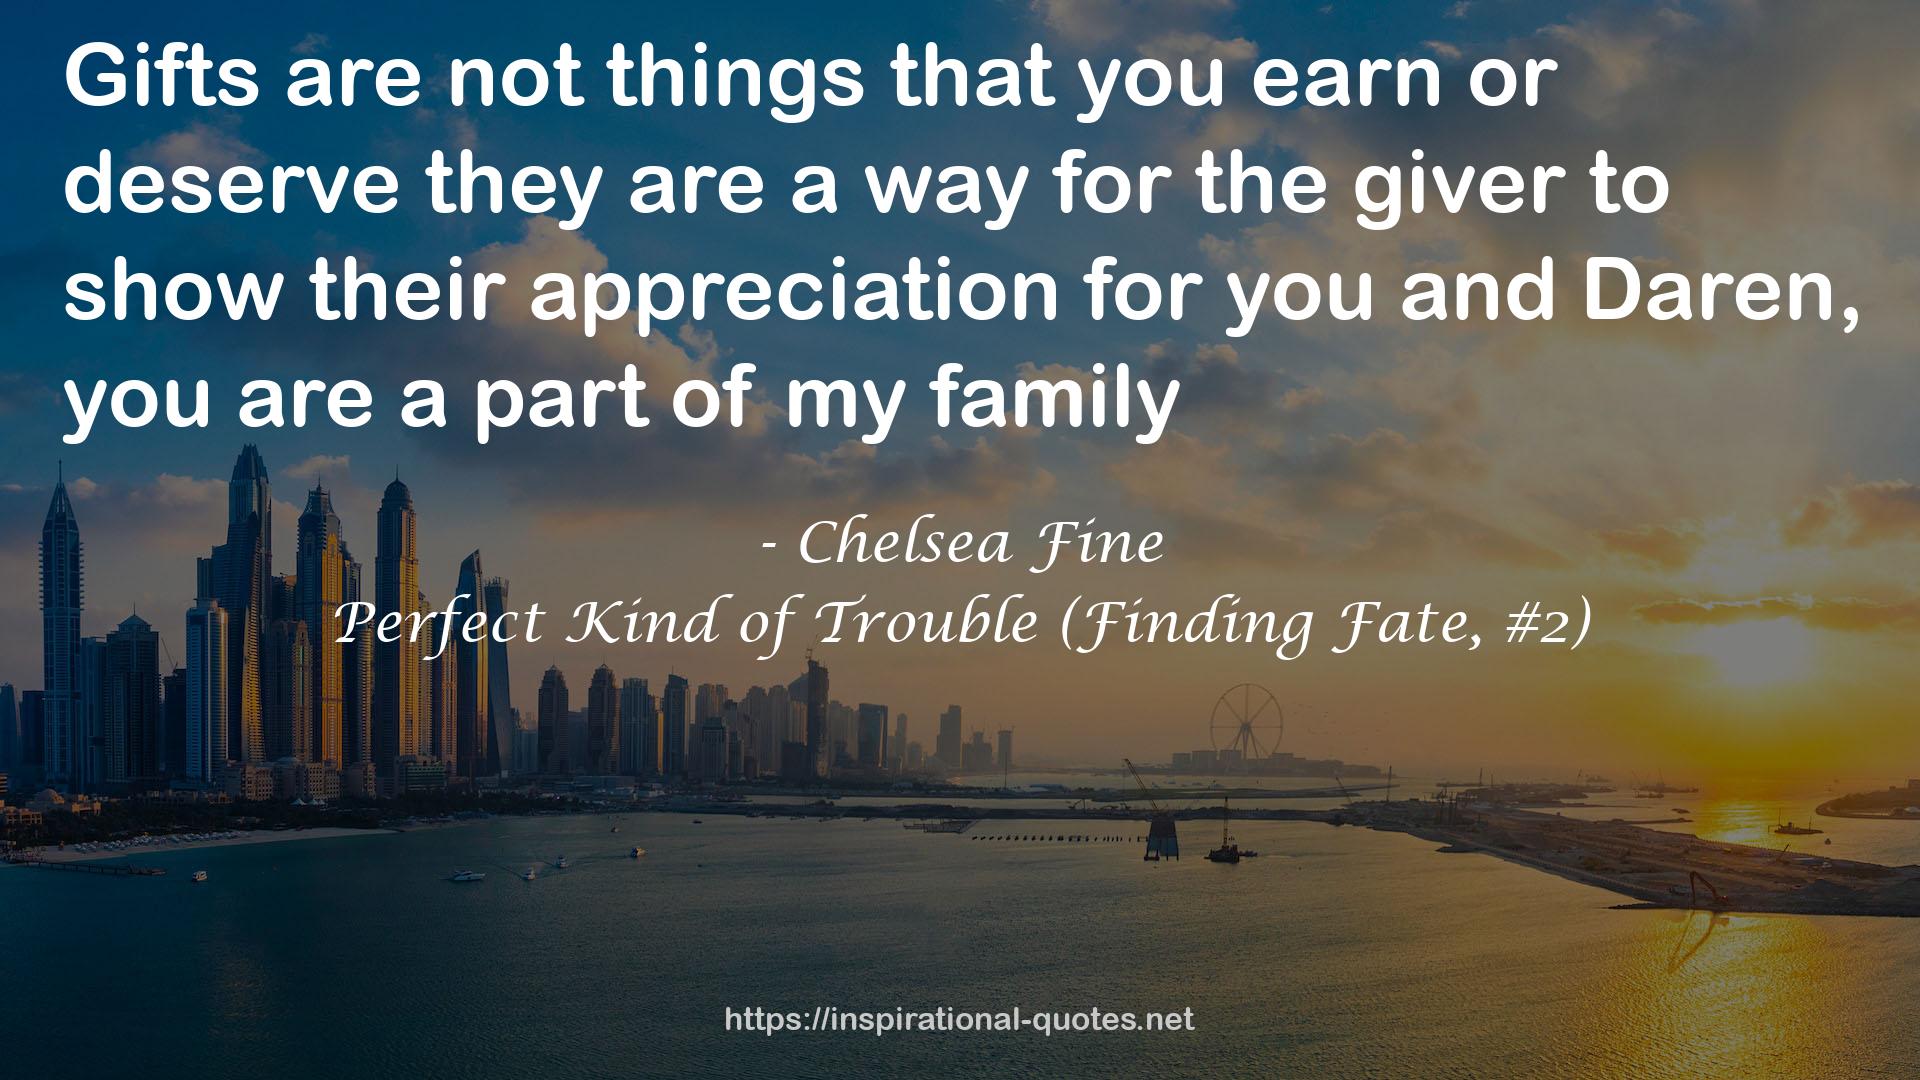 Perfect Kind of Trouble (Finding Fate, #2) QUOTES